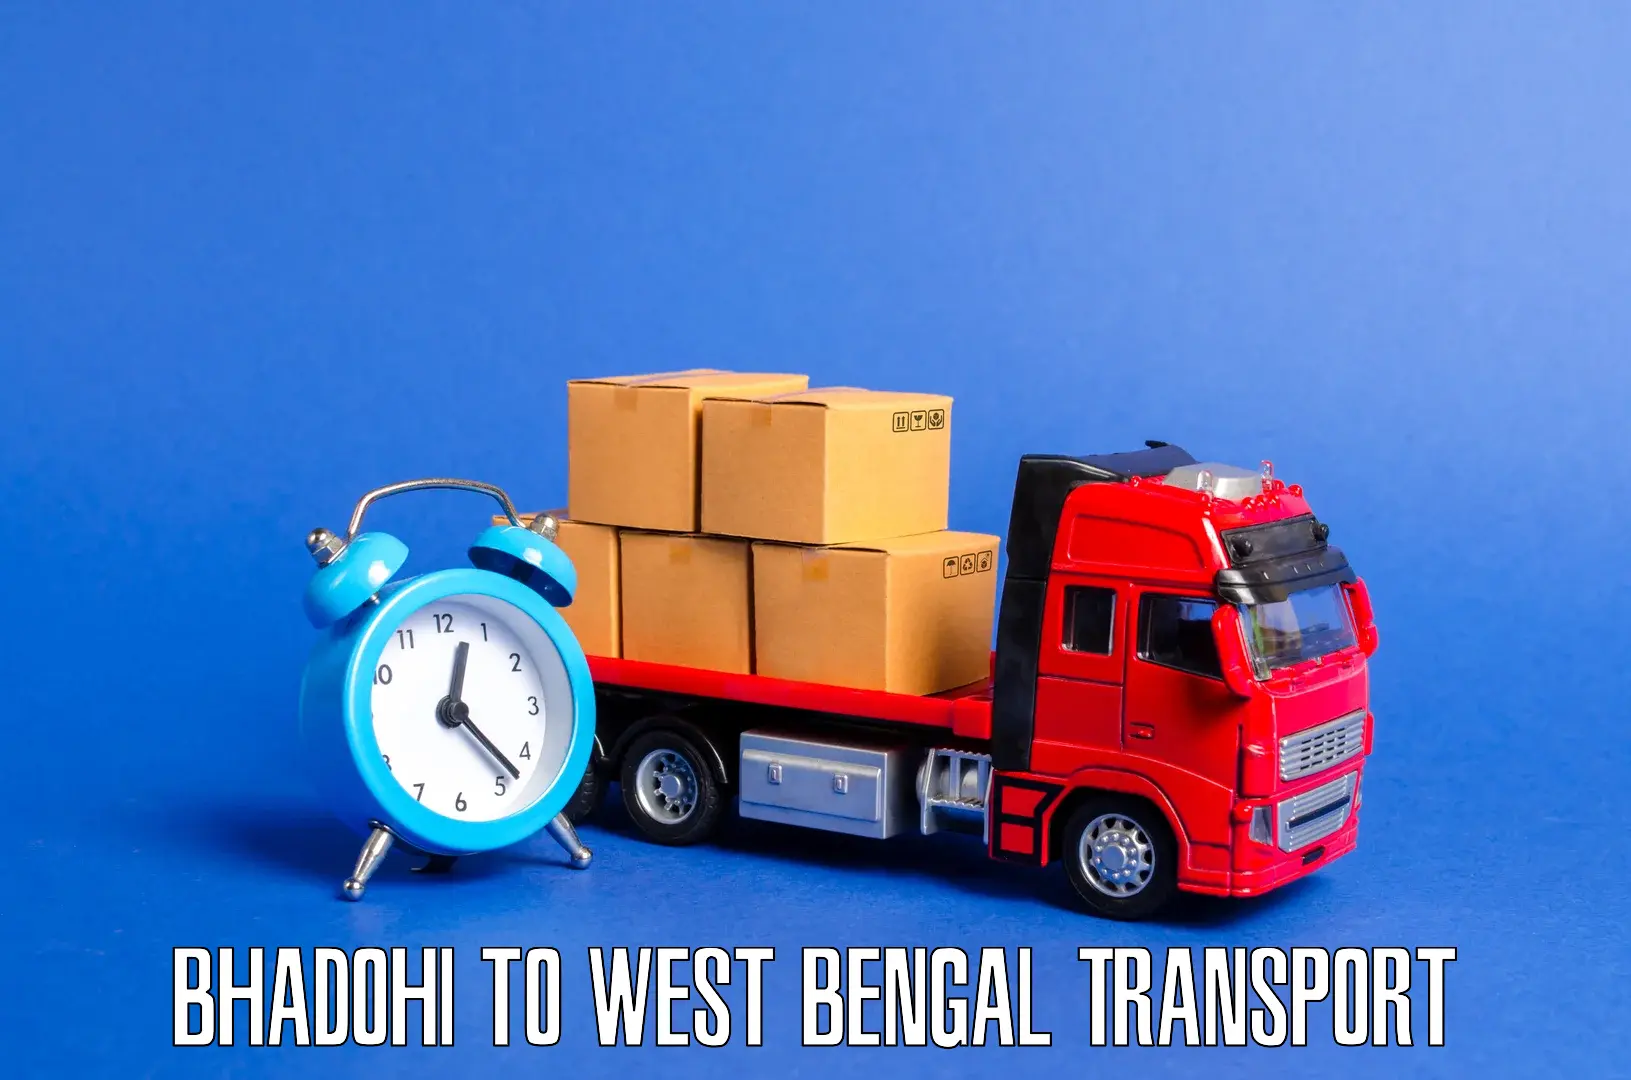 Nearby transport service Bhadohi to Barasat